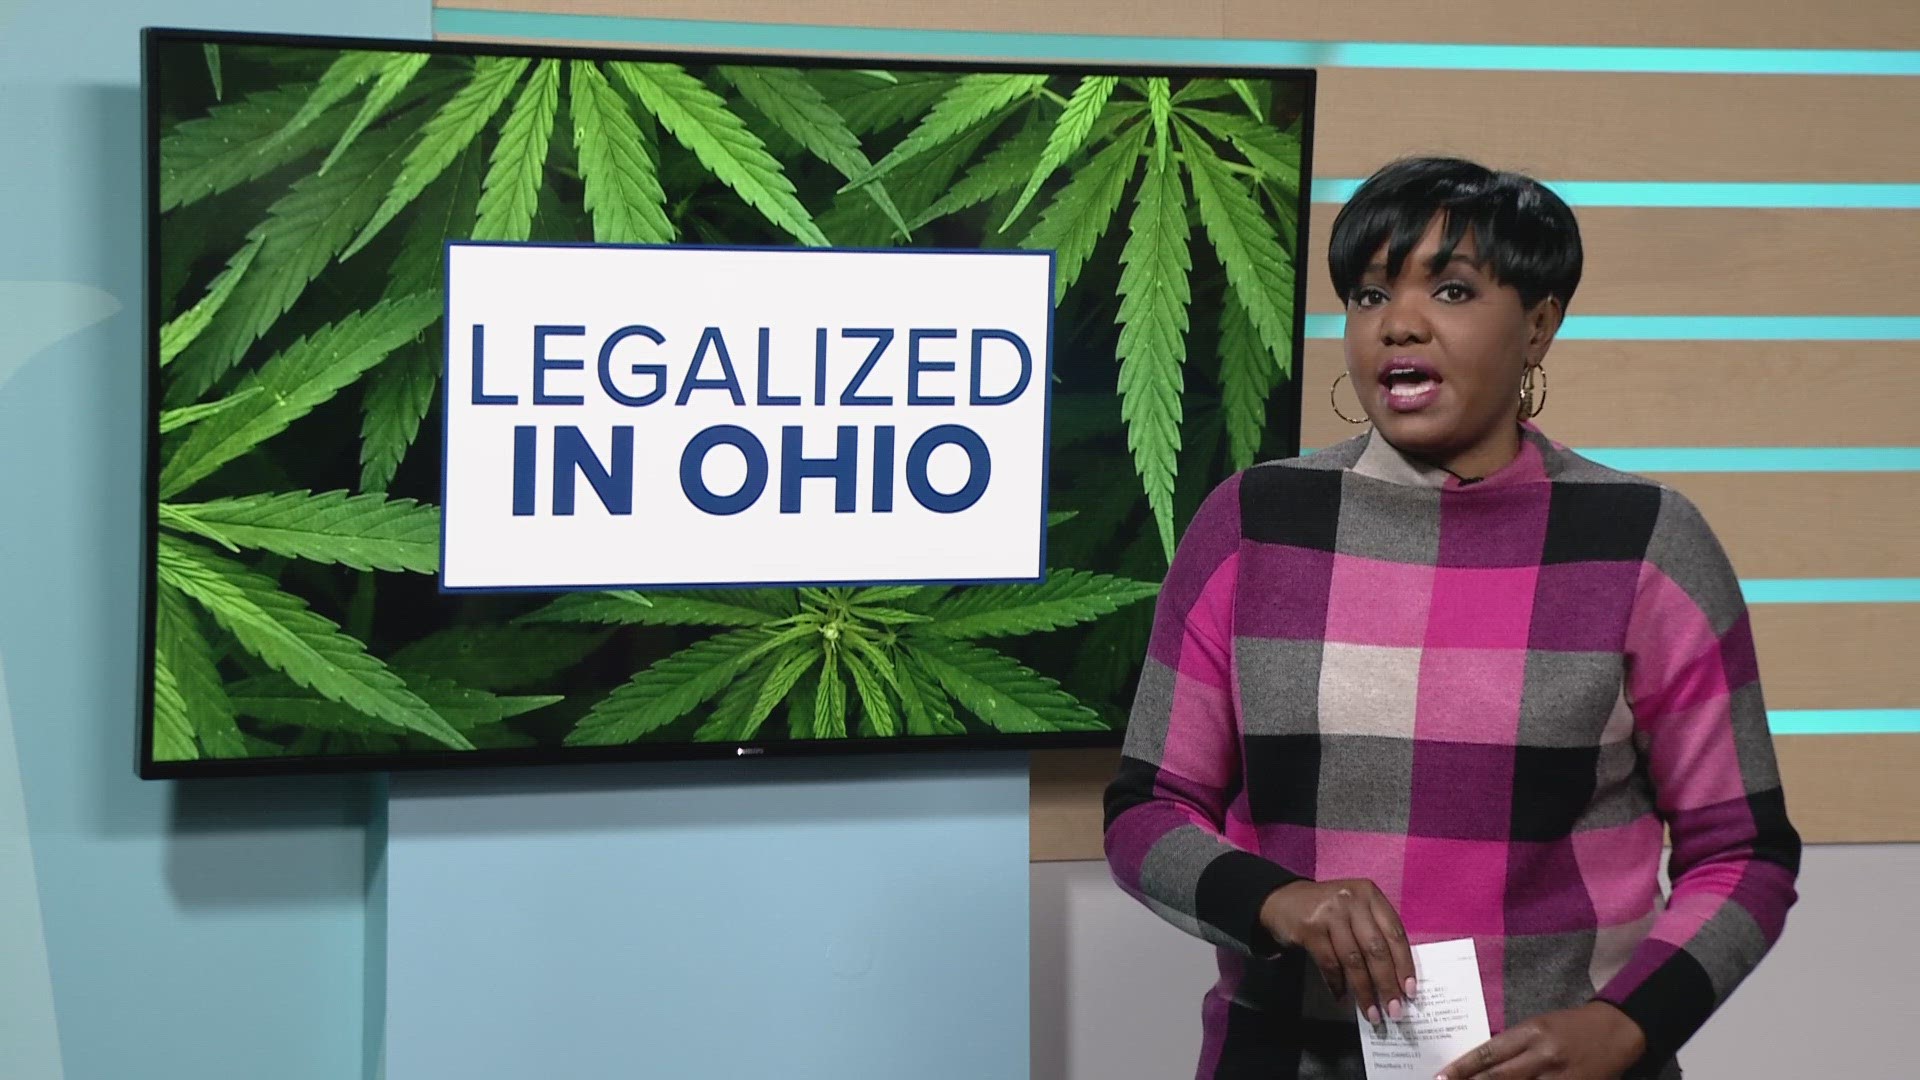 Ohio is the 24th state in the country to make recreational use of marijuana legal.